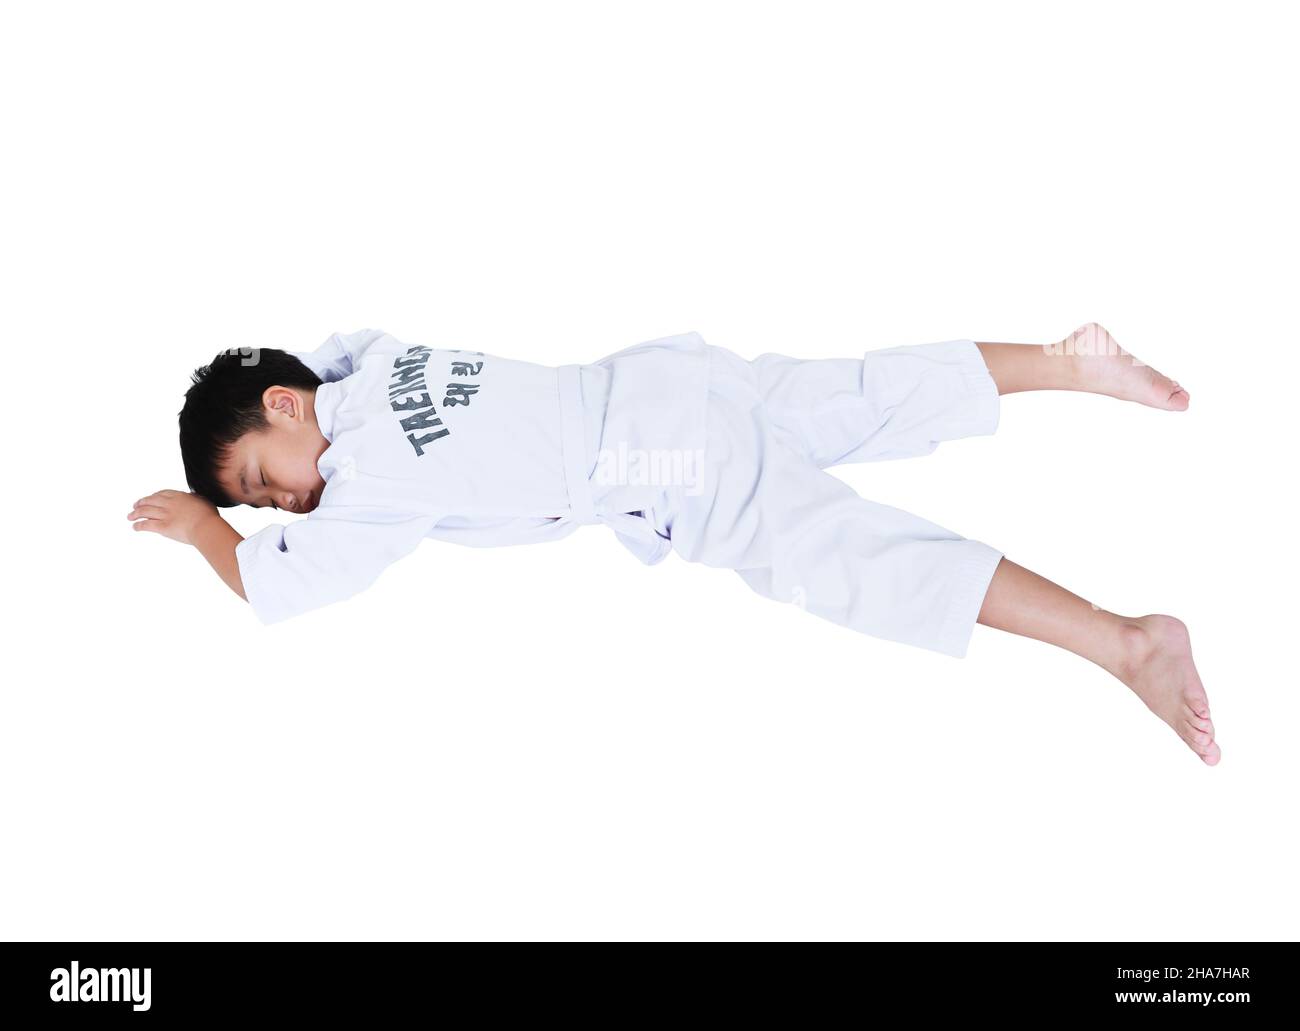 Accidents in sports. Full body of asian child athletes taekwondo with white belt lying in  prone position unconscious, isolated on white background. C Stock Photo